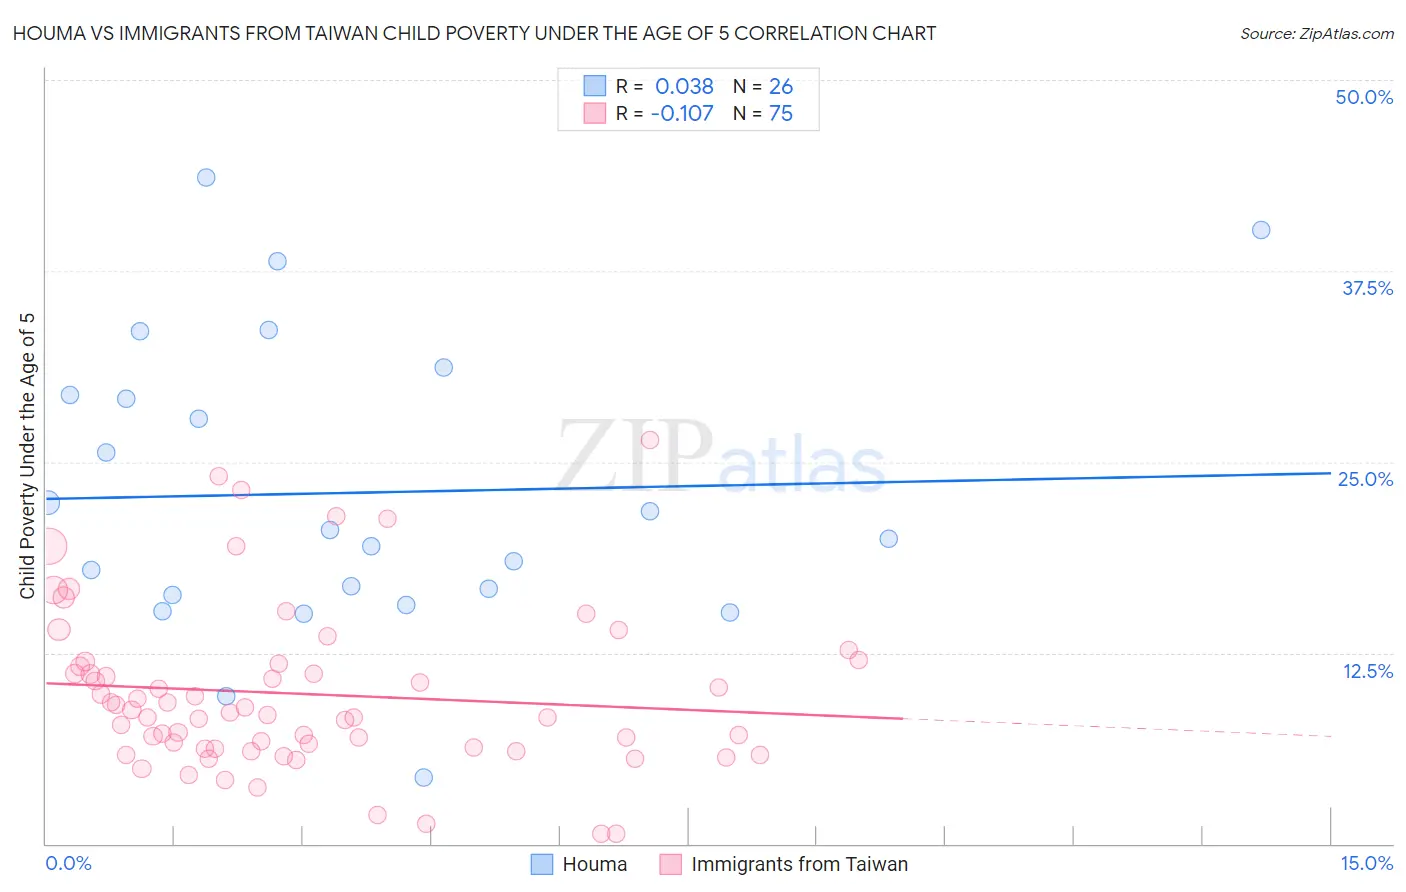 Houma vs Immigrants from Taiwan Child Poverty Under the Age of 5